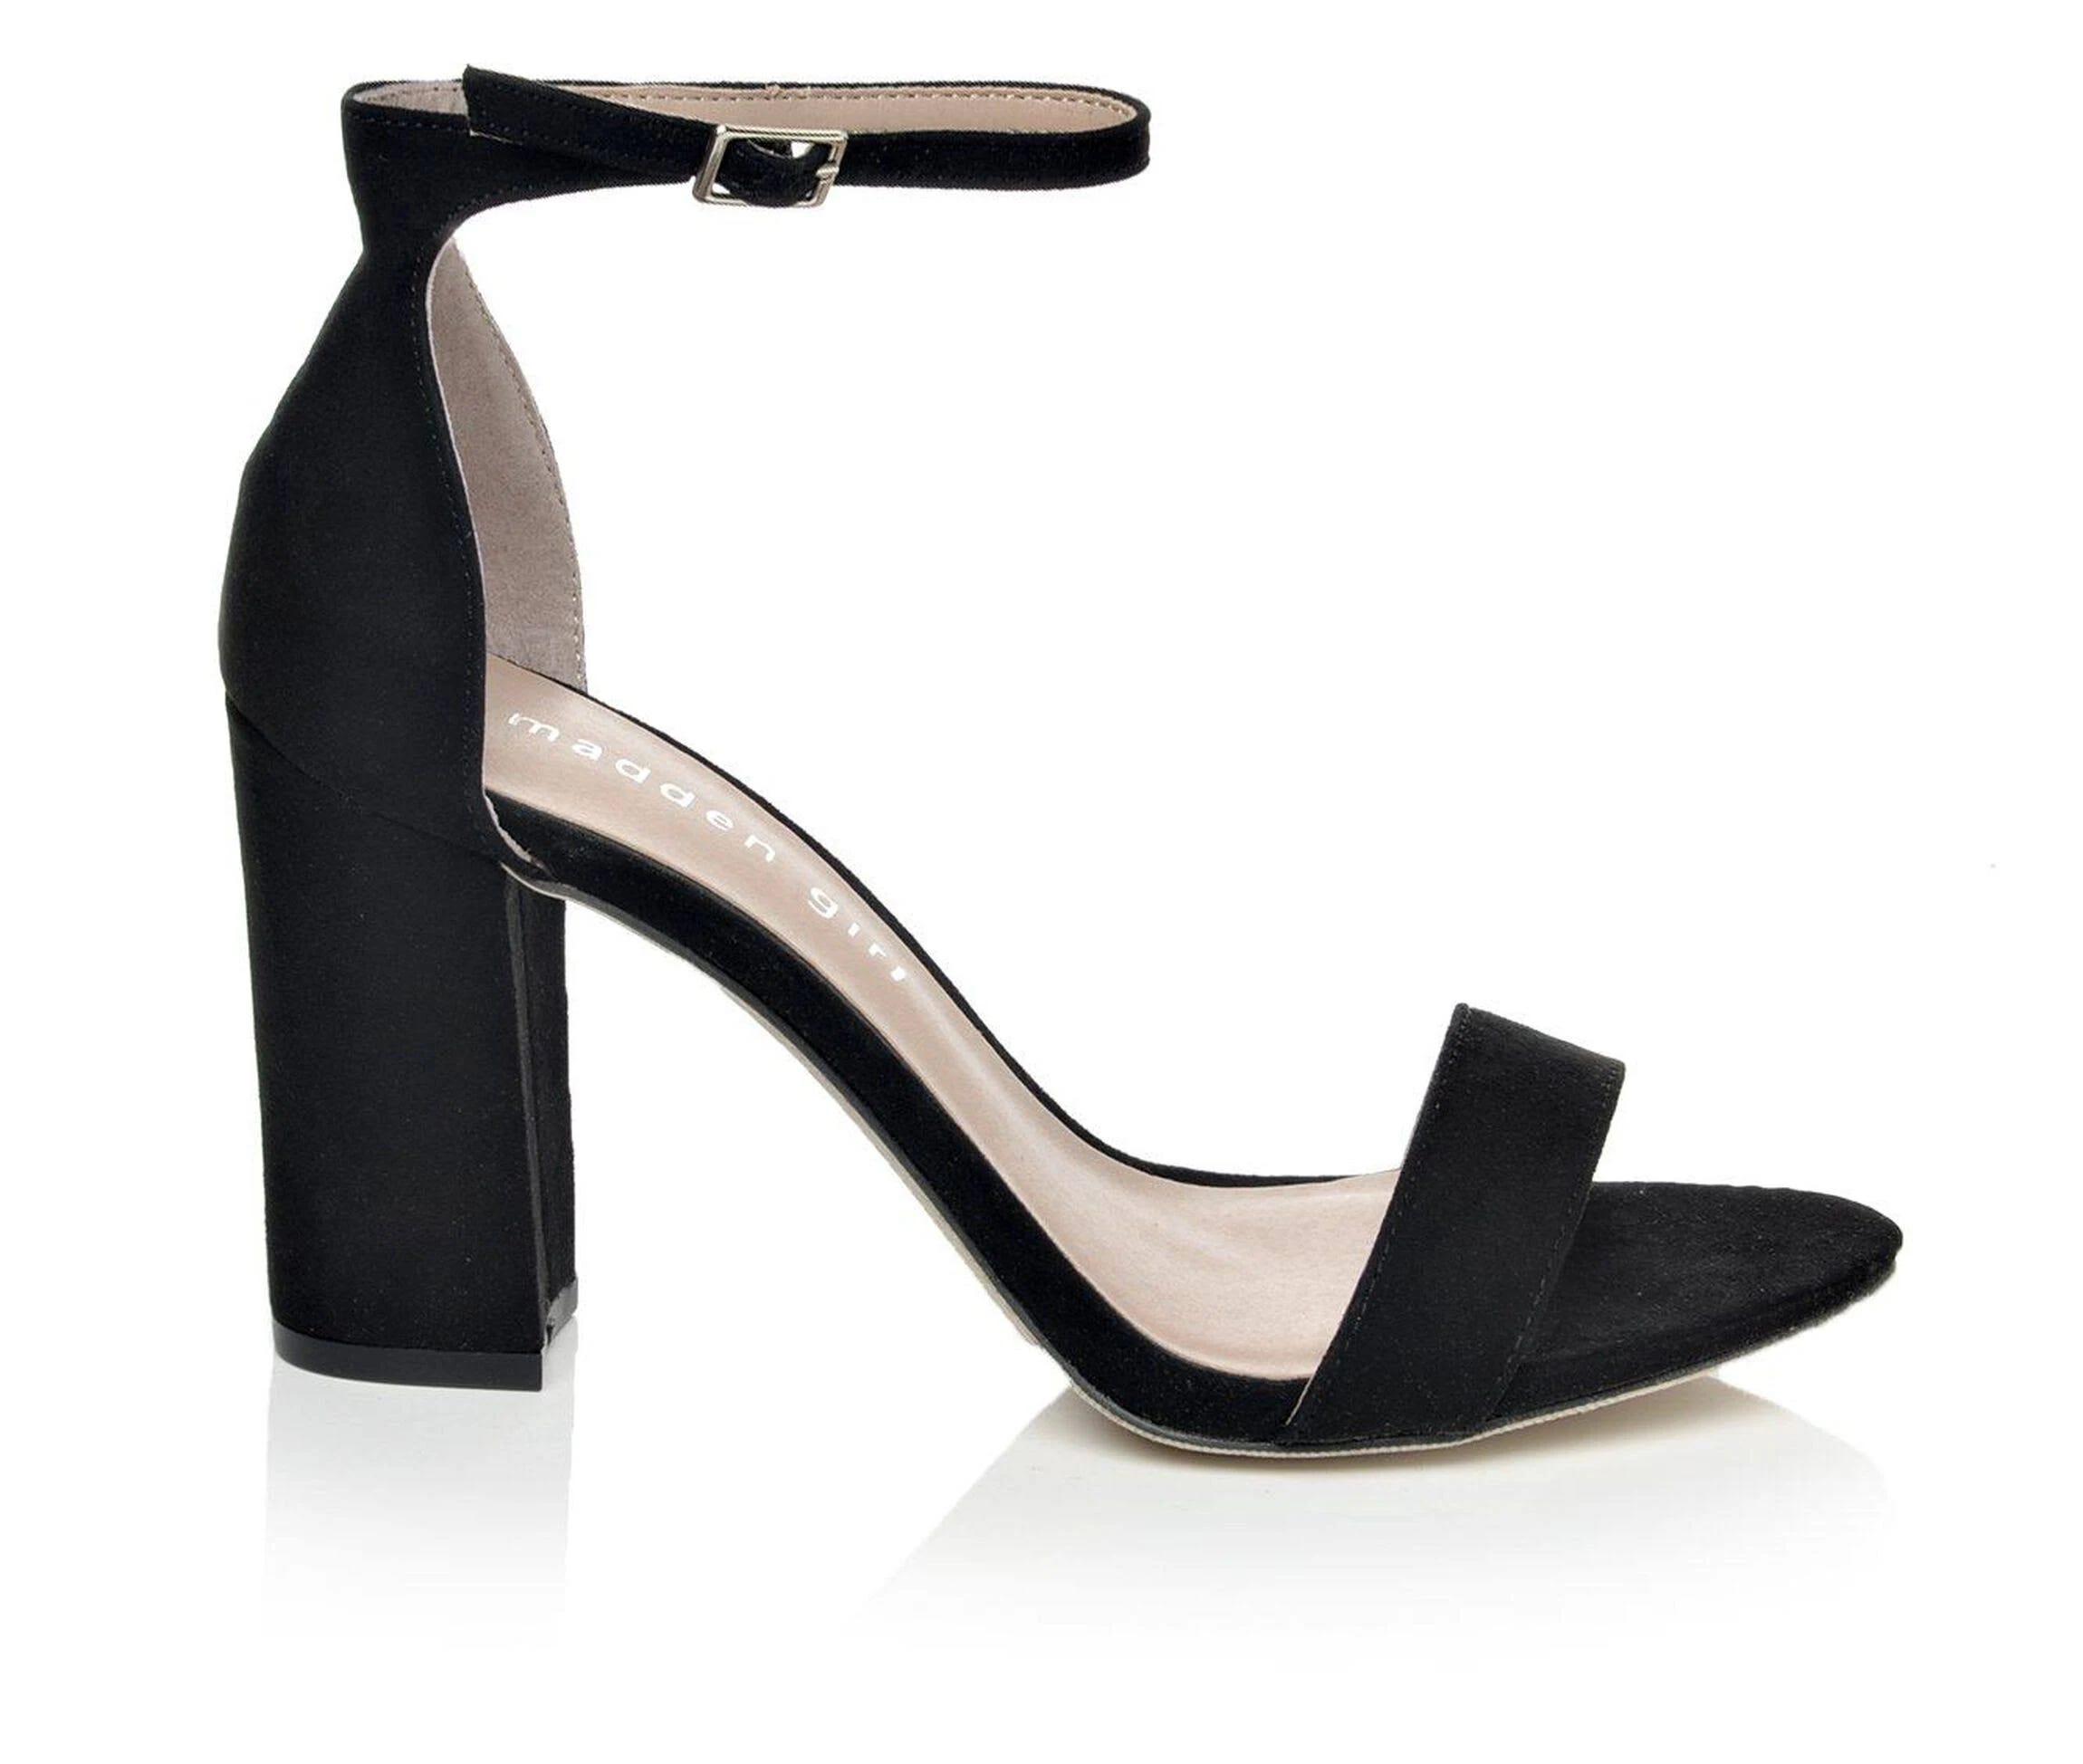 Black Strappy Pumps with Adjustable Fit and Comfortable Block Heel | Image